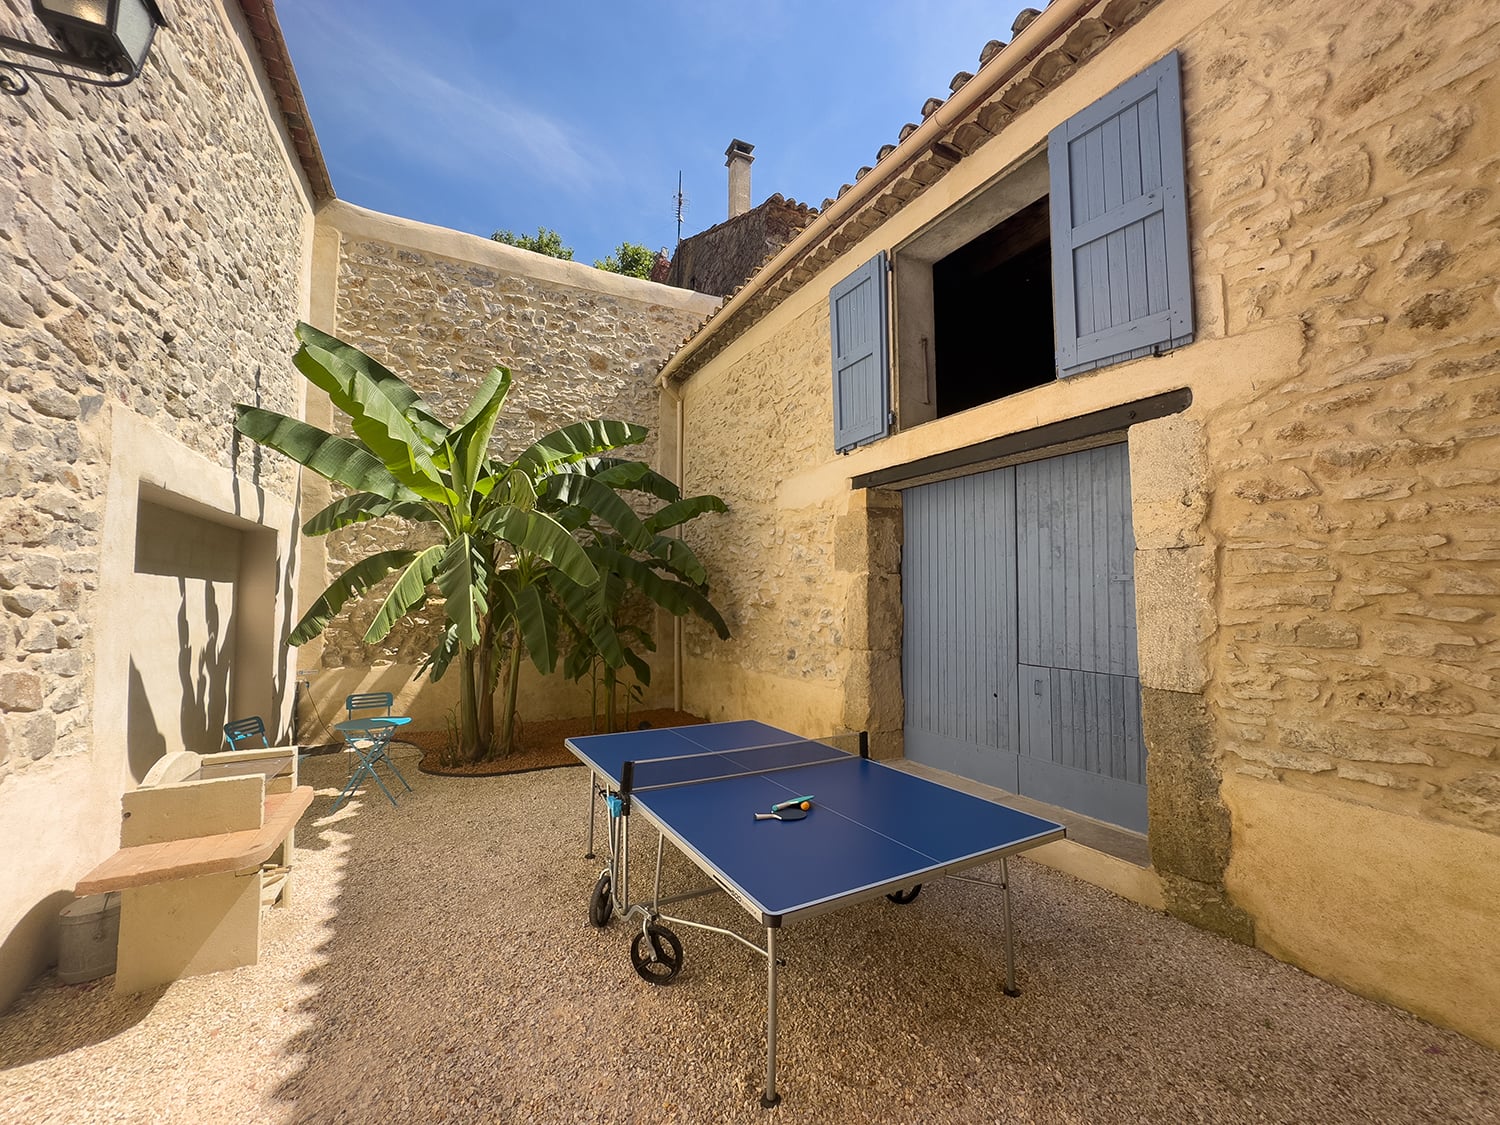 Courtyard with table tennis